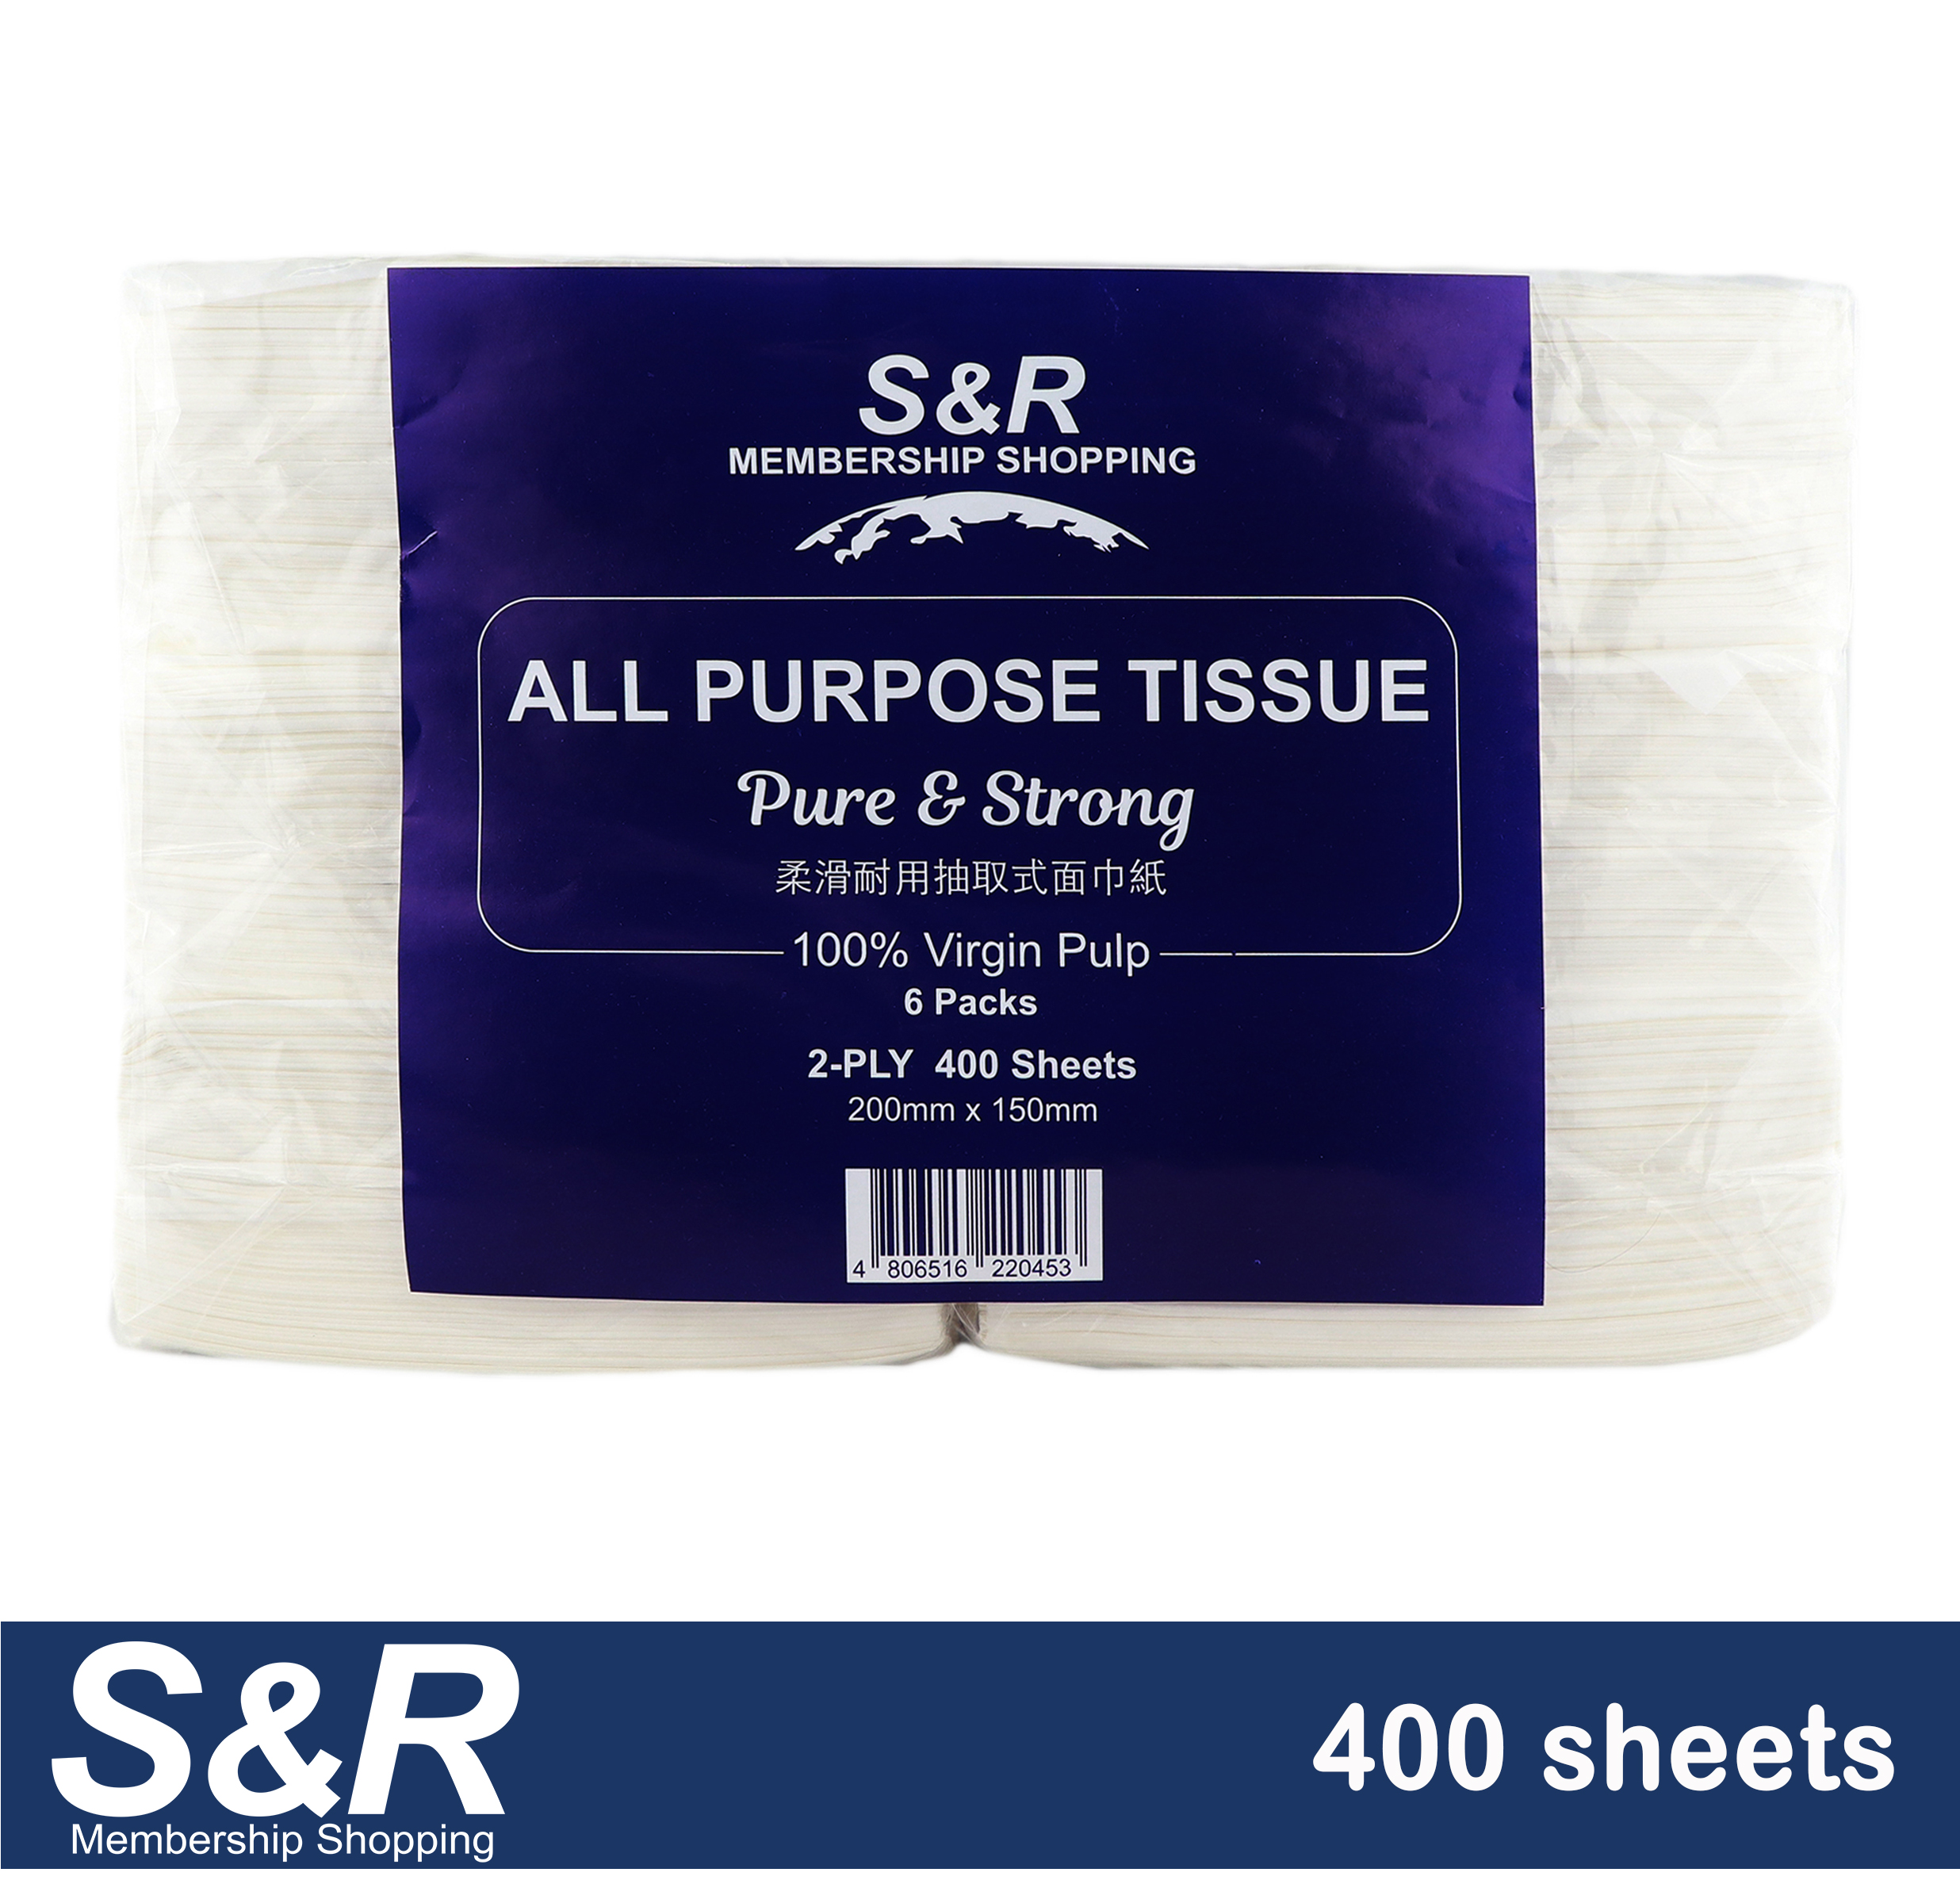 S R Membership Shopping All Purpose Tissue 400 Sheets Review And Price